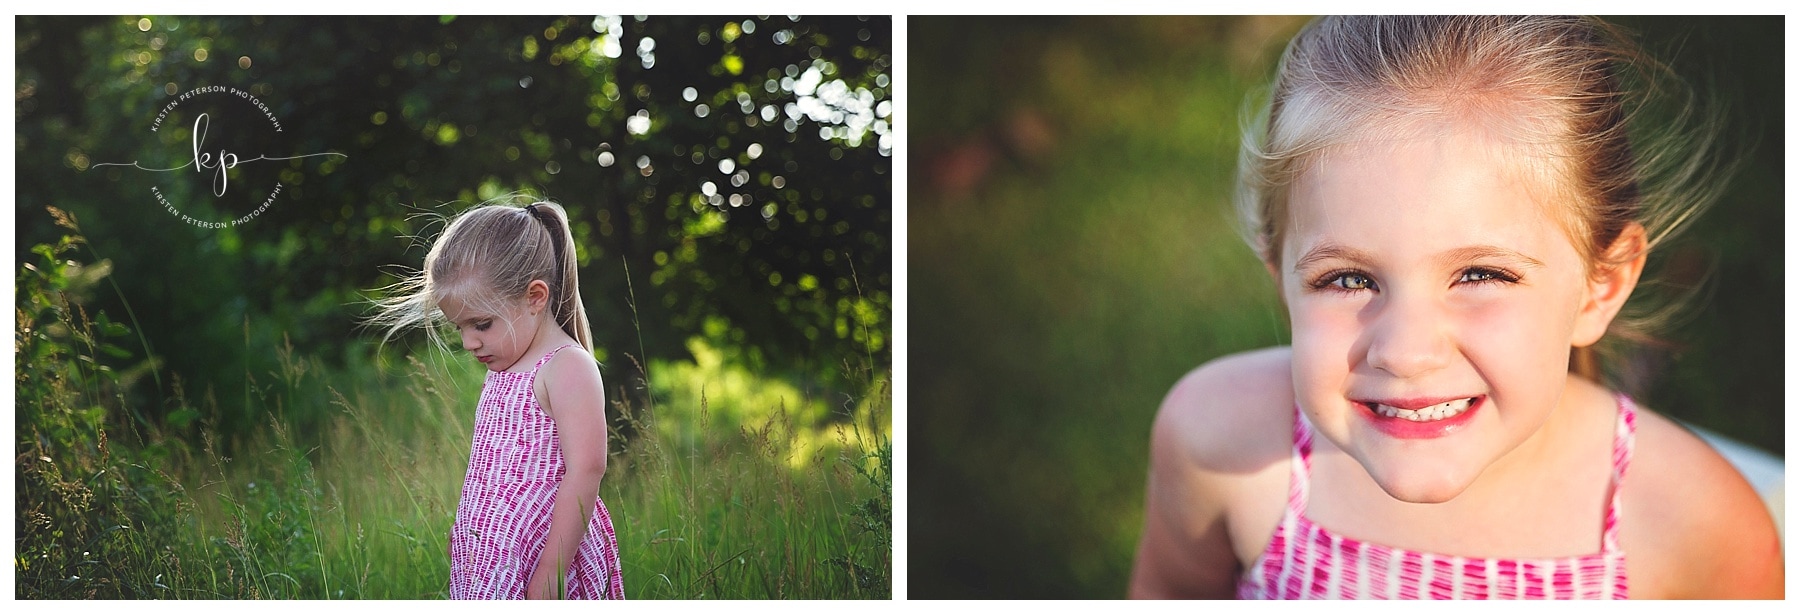 3 year old little girl photography session in green park setting in summer in field in sun and golden hour